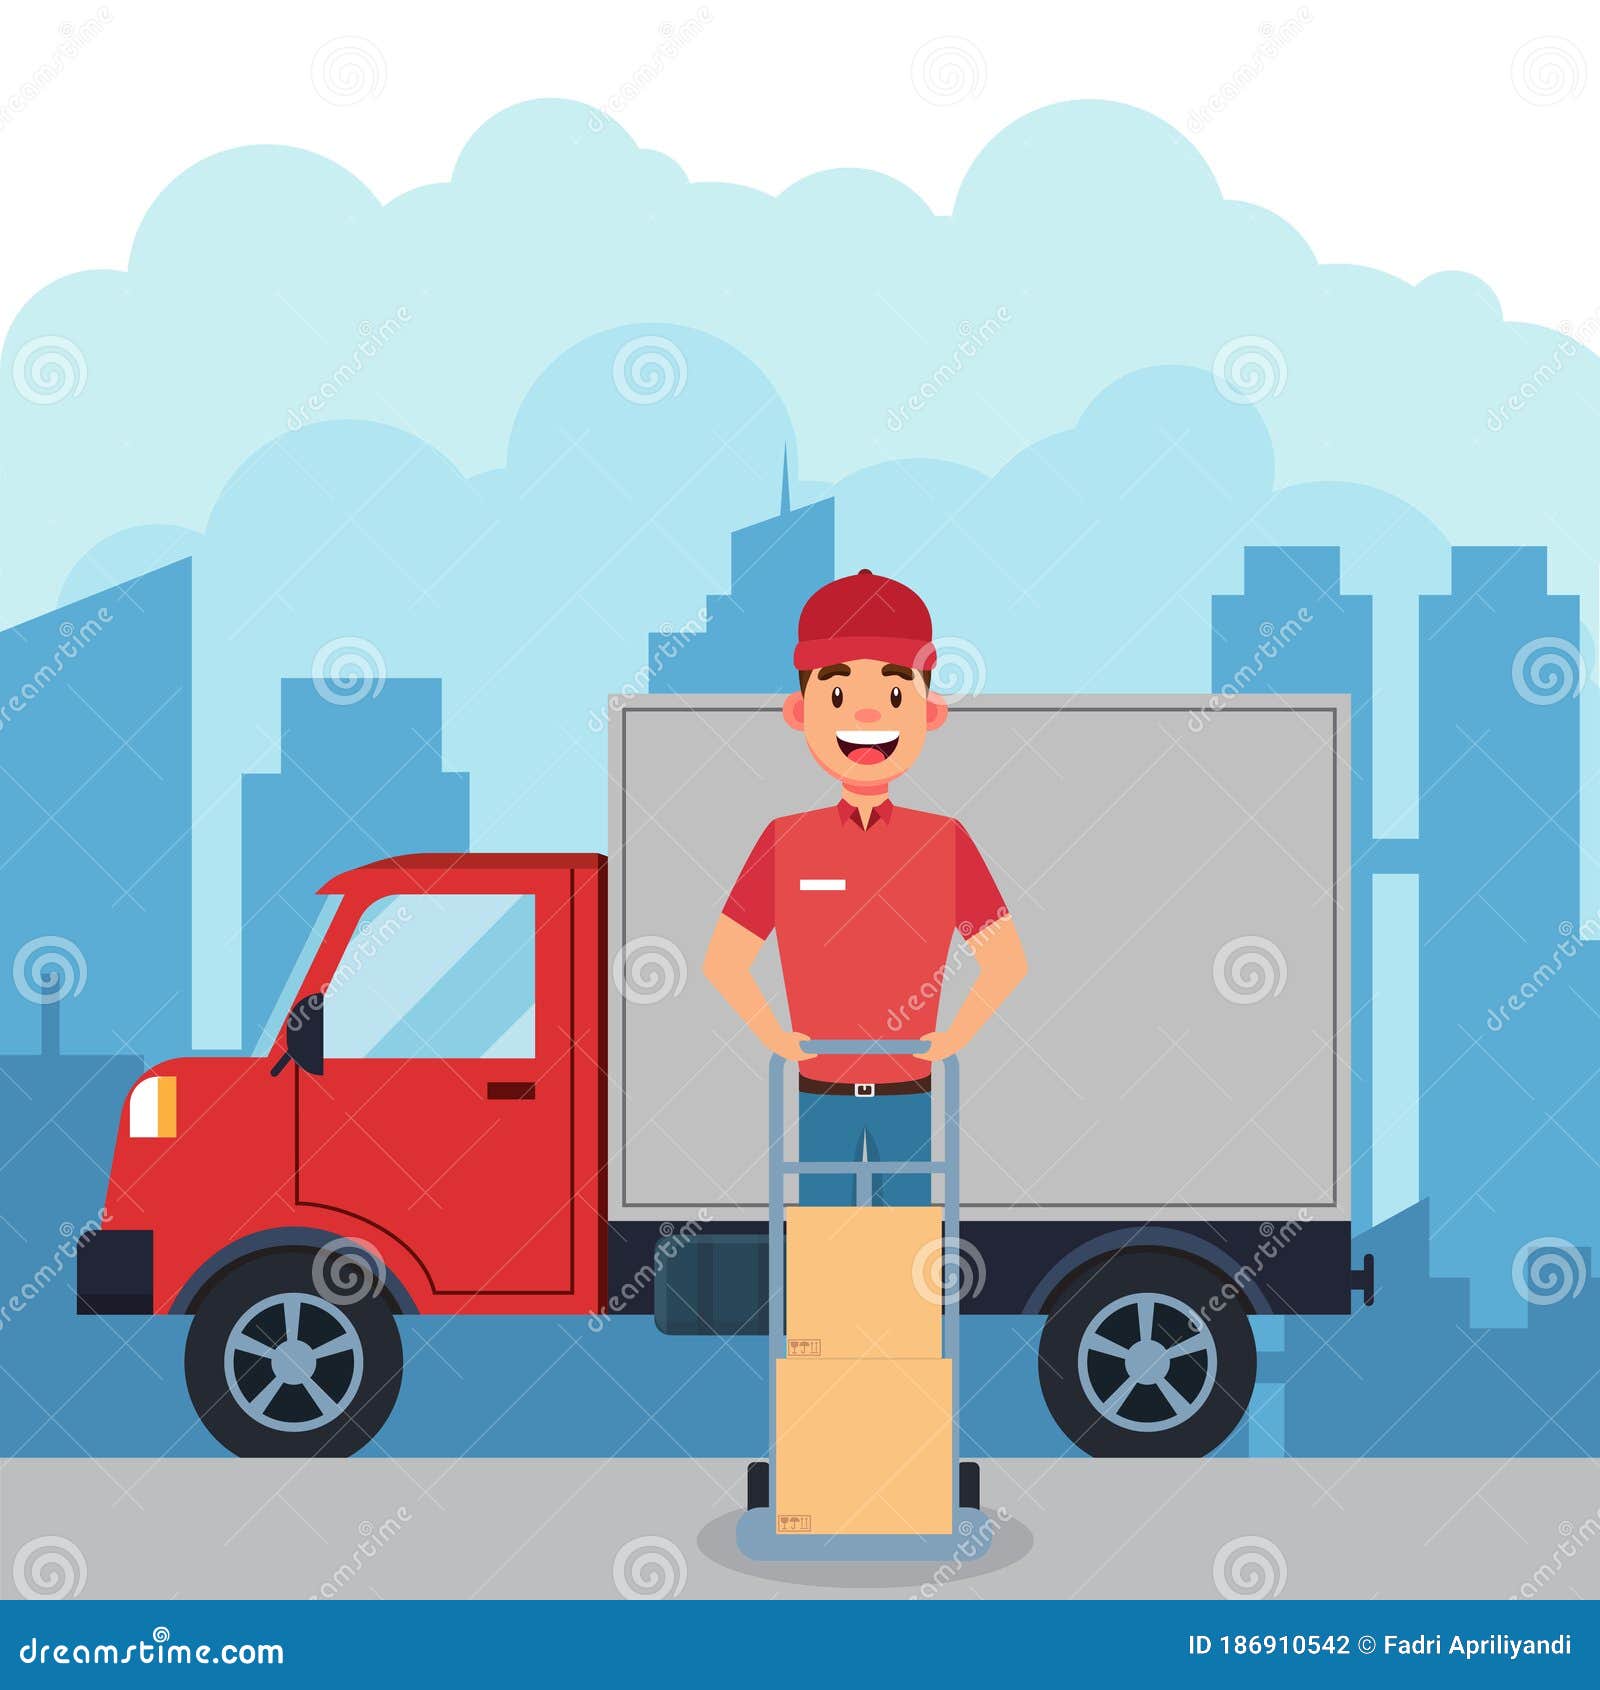 Delivery Man with Truck Cartoon Stock Vector - Illustration of people,  cargo: 186910542